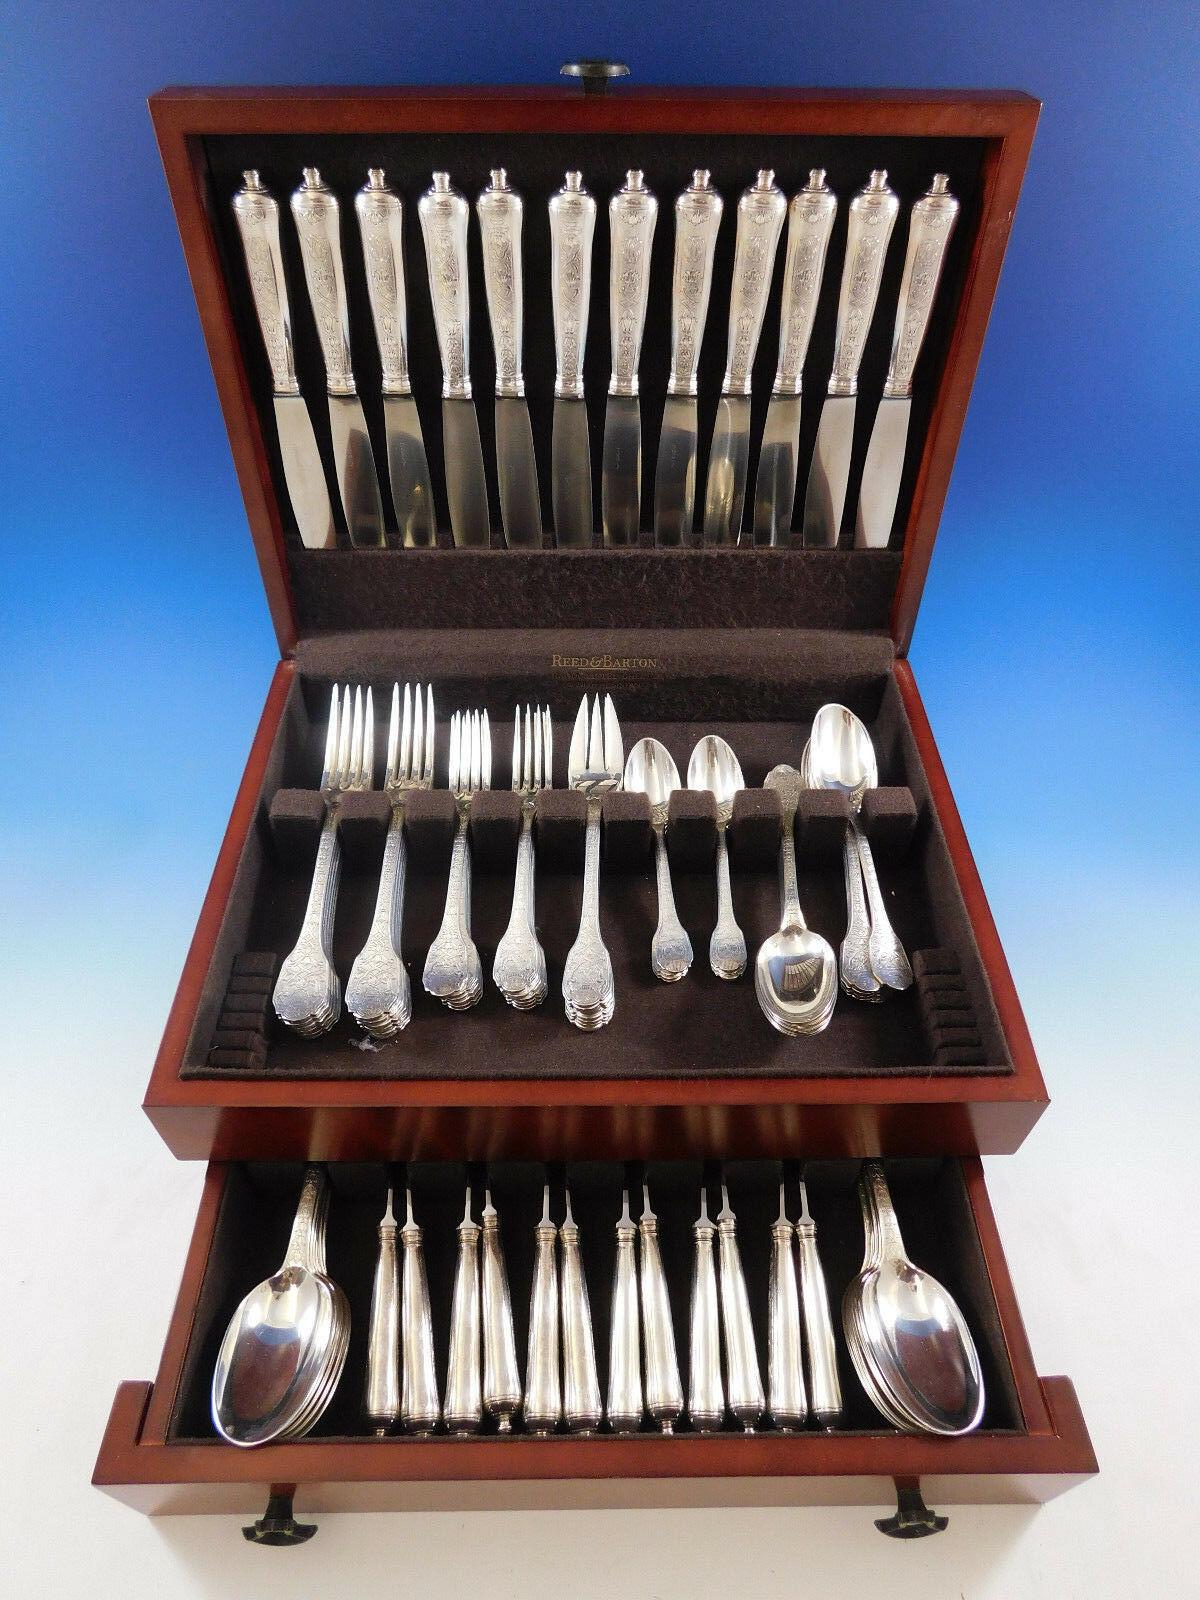 Outstanding Soubise by Puiforcat France sterling silver Flatware set, 88 pieces. This set includes:

12 dinner size knives with cannon handles, 10